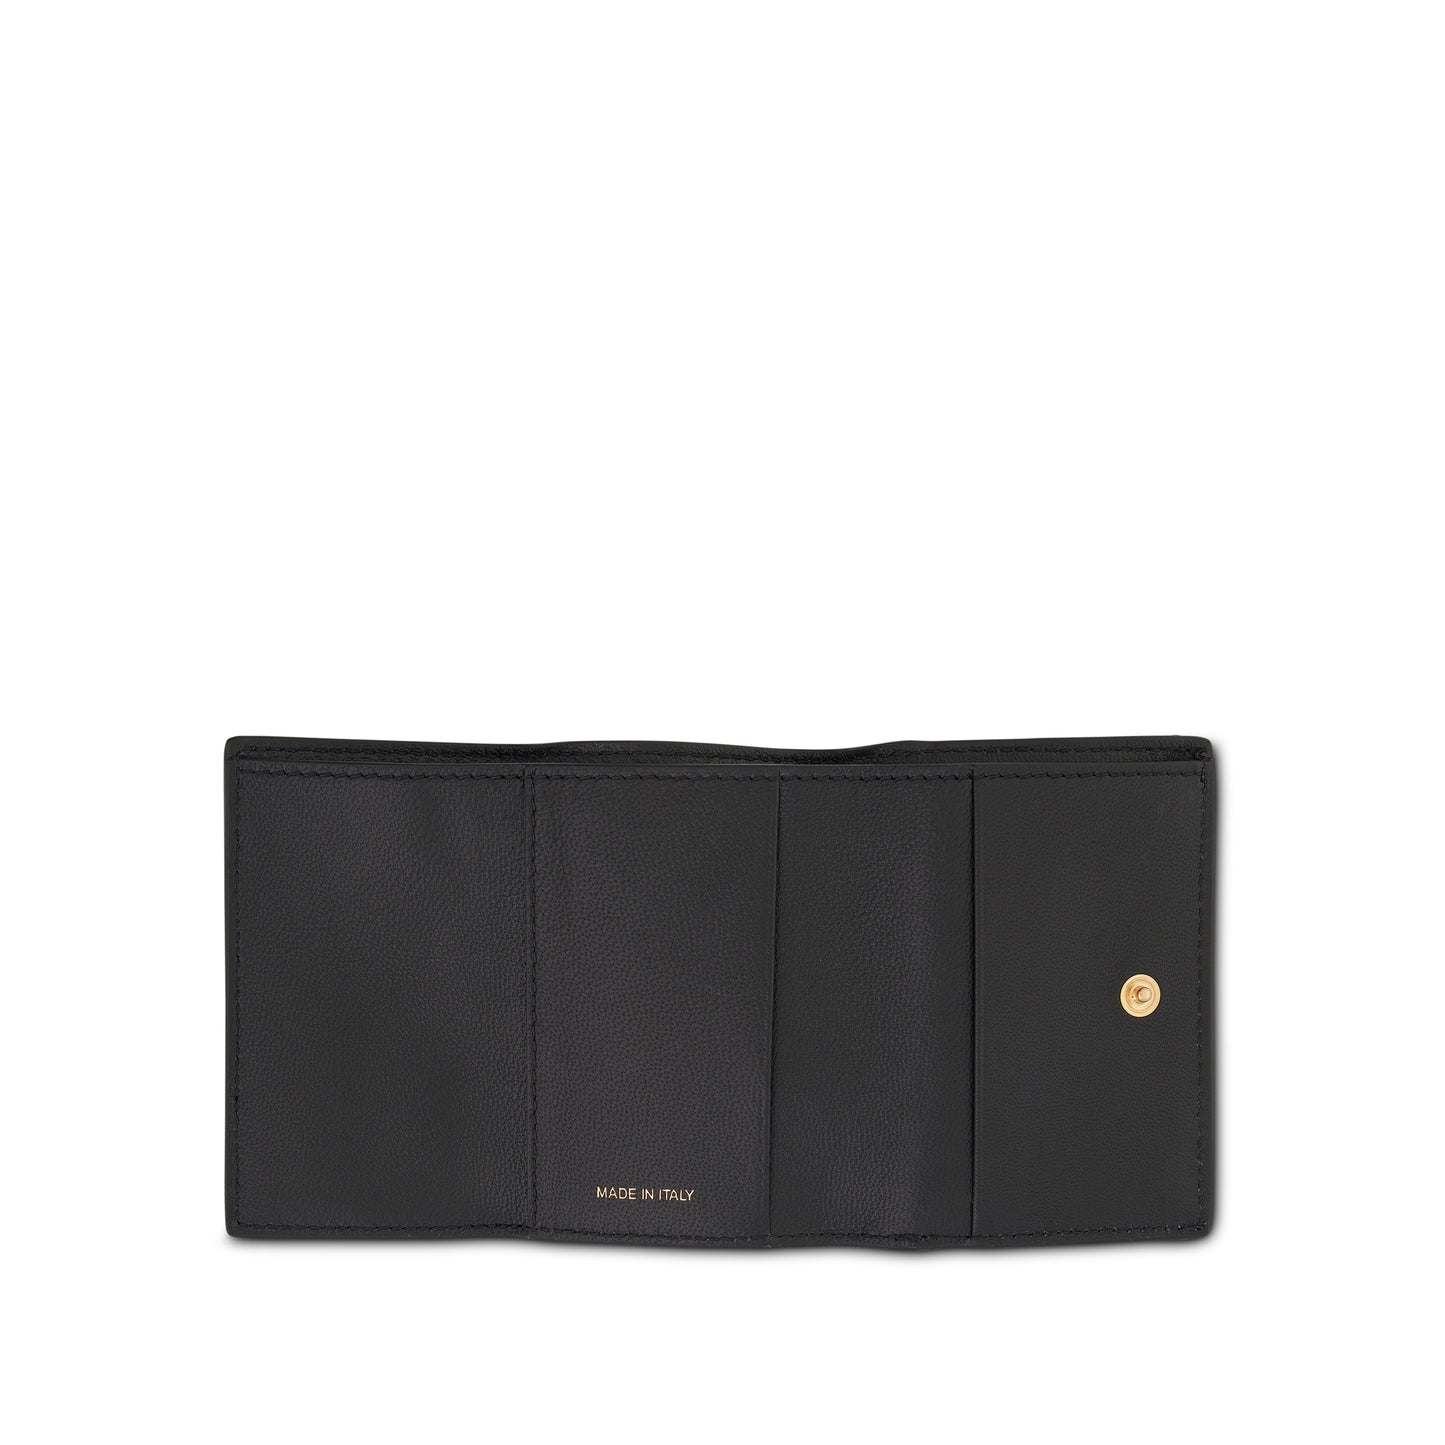 Trifold Saffiano Leather Wallet in Black